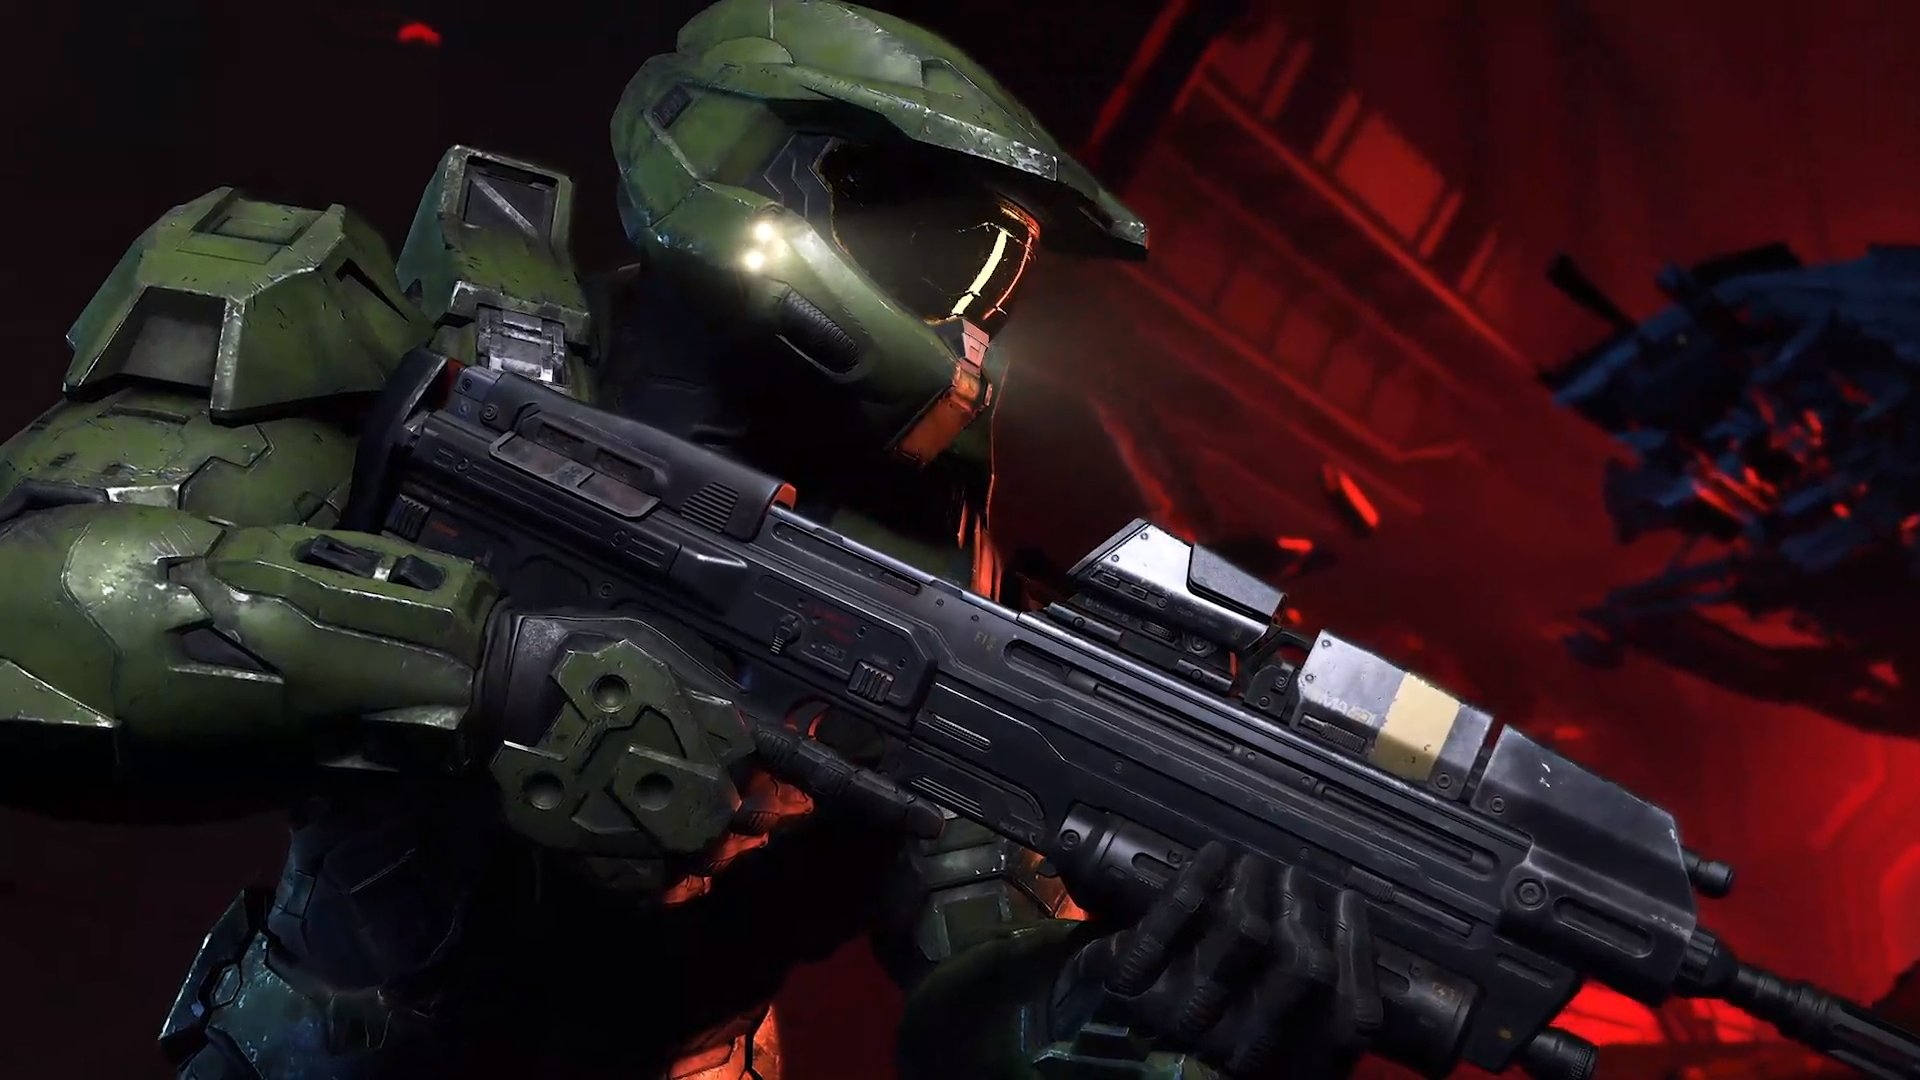 Halo: The Master Chief Collection Is Now Playable On Steam Deck - GameSpot